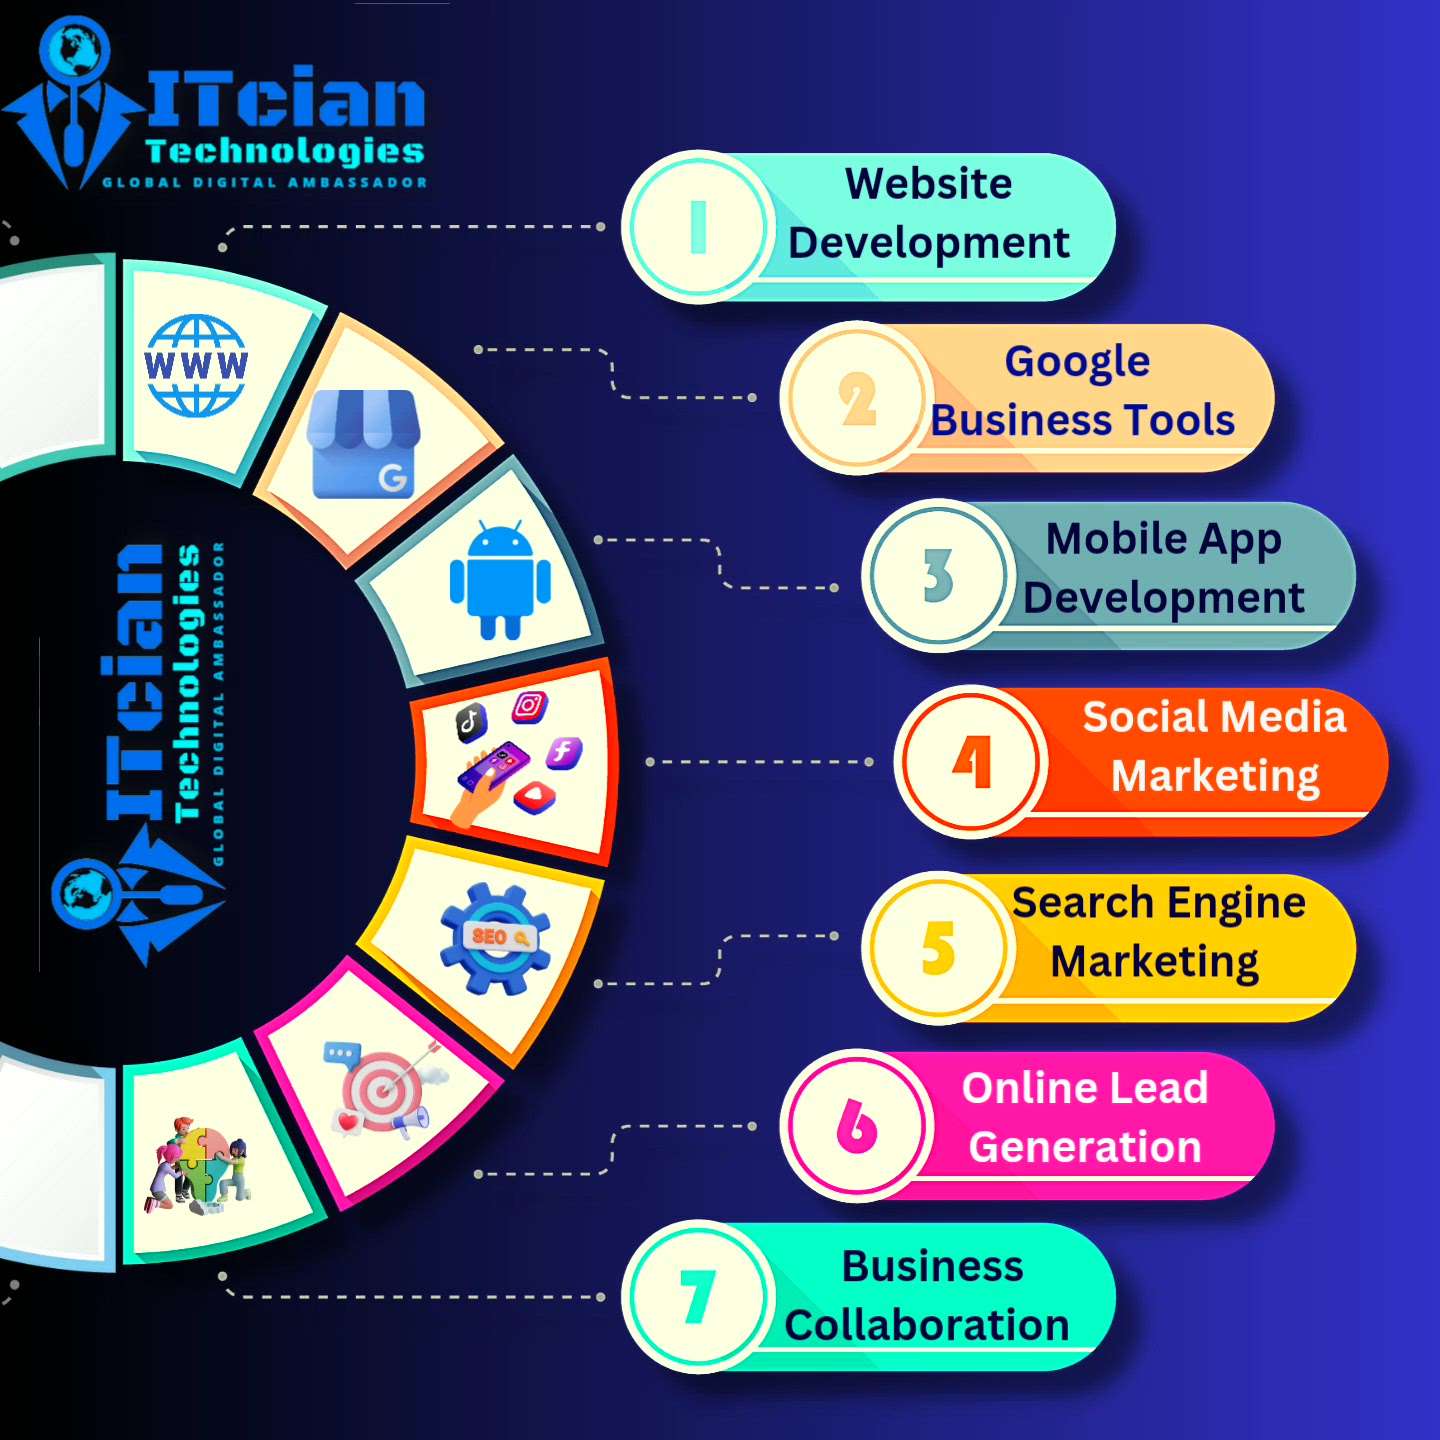 ITcian Technologies is a leading IT company which provides all types of IT and marketing services i.e. Digital Marketing Services which includes Google My Business (GMVT) , Search engine optimization ( Google SEO) , Search Engine Marketing (SEM / ppc management ) , Social Media Marketing ( SMM ) ( Instagram , Facebook , Linkedin , Twitter , Tumblr , Pinterest ) , Social Media Optimization , Website and Application Development , IT Products and Services which includes SAP , SAAS etc. we provide all types of services to grow your businesses .
Customers satisfaction is our top notch priority so feel free to connect to us.

Pay after Result Offer
#Collaboration
#Lead Generation
#onlinemarketing 
#digitalmarketing 
#business